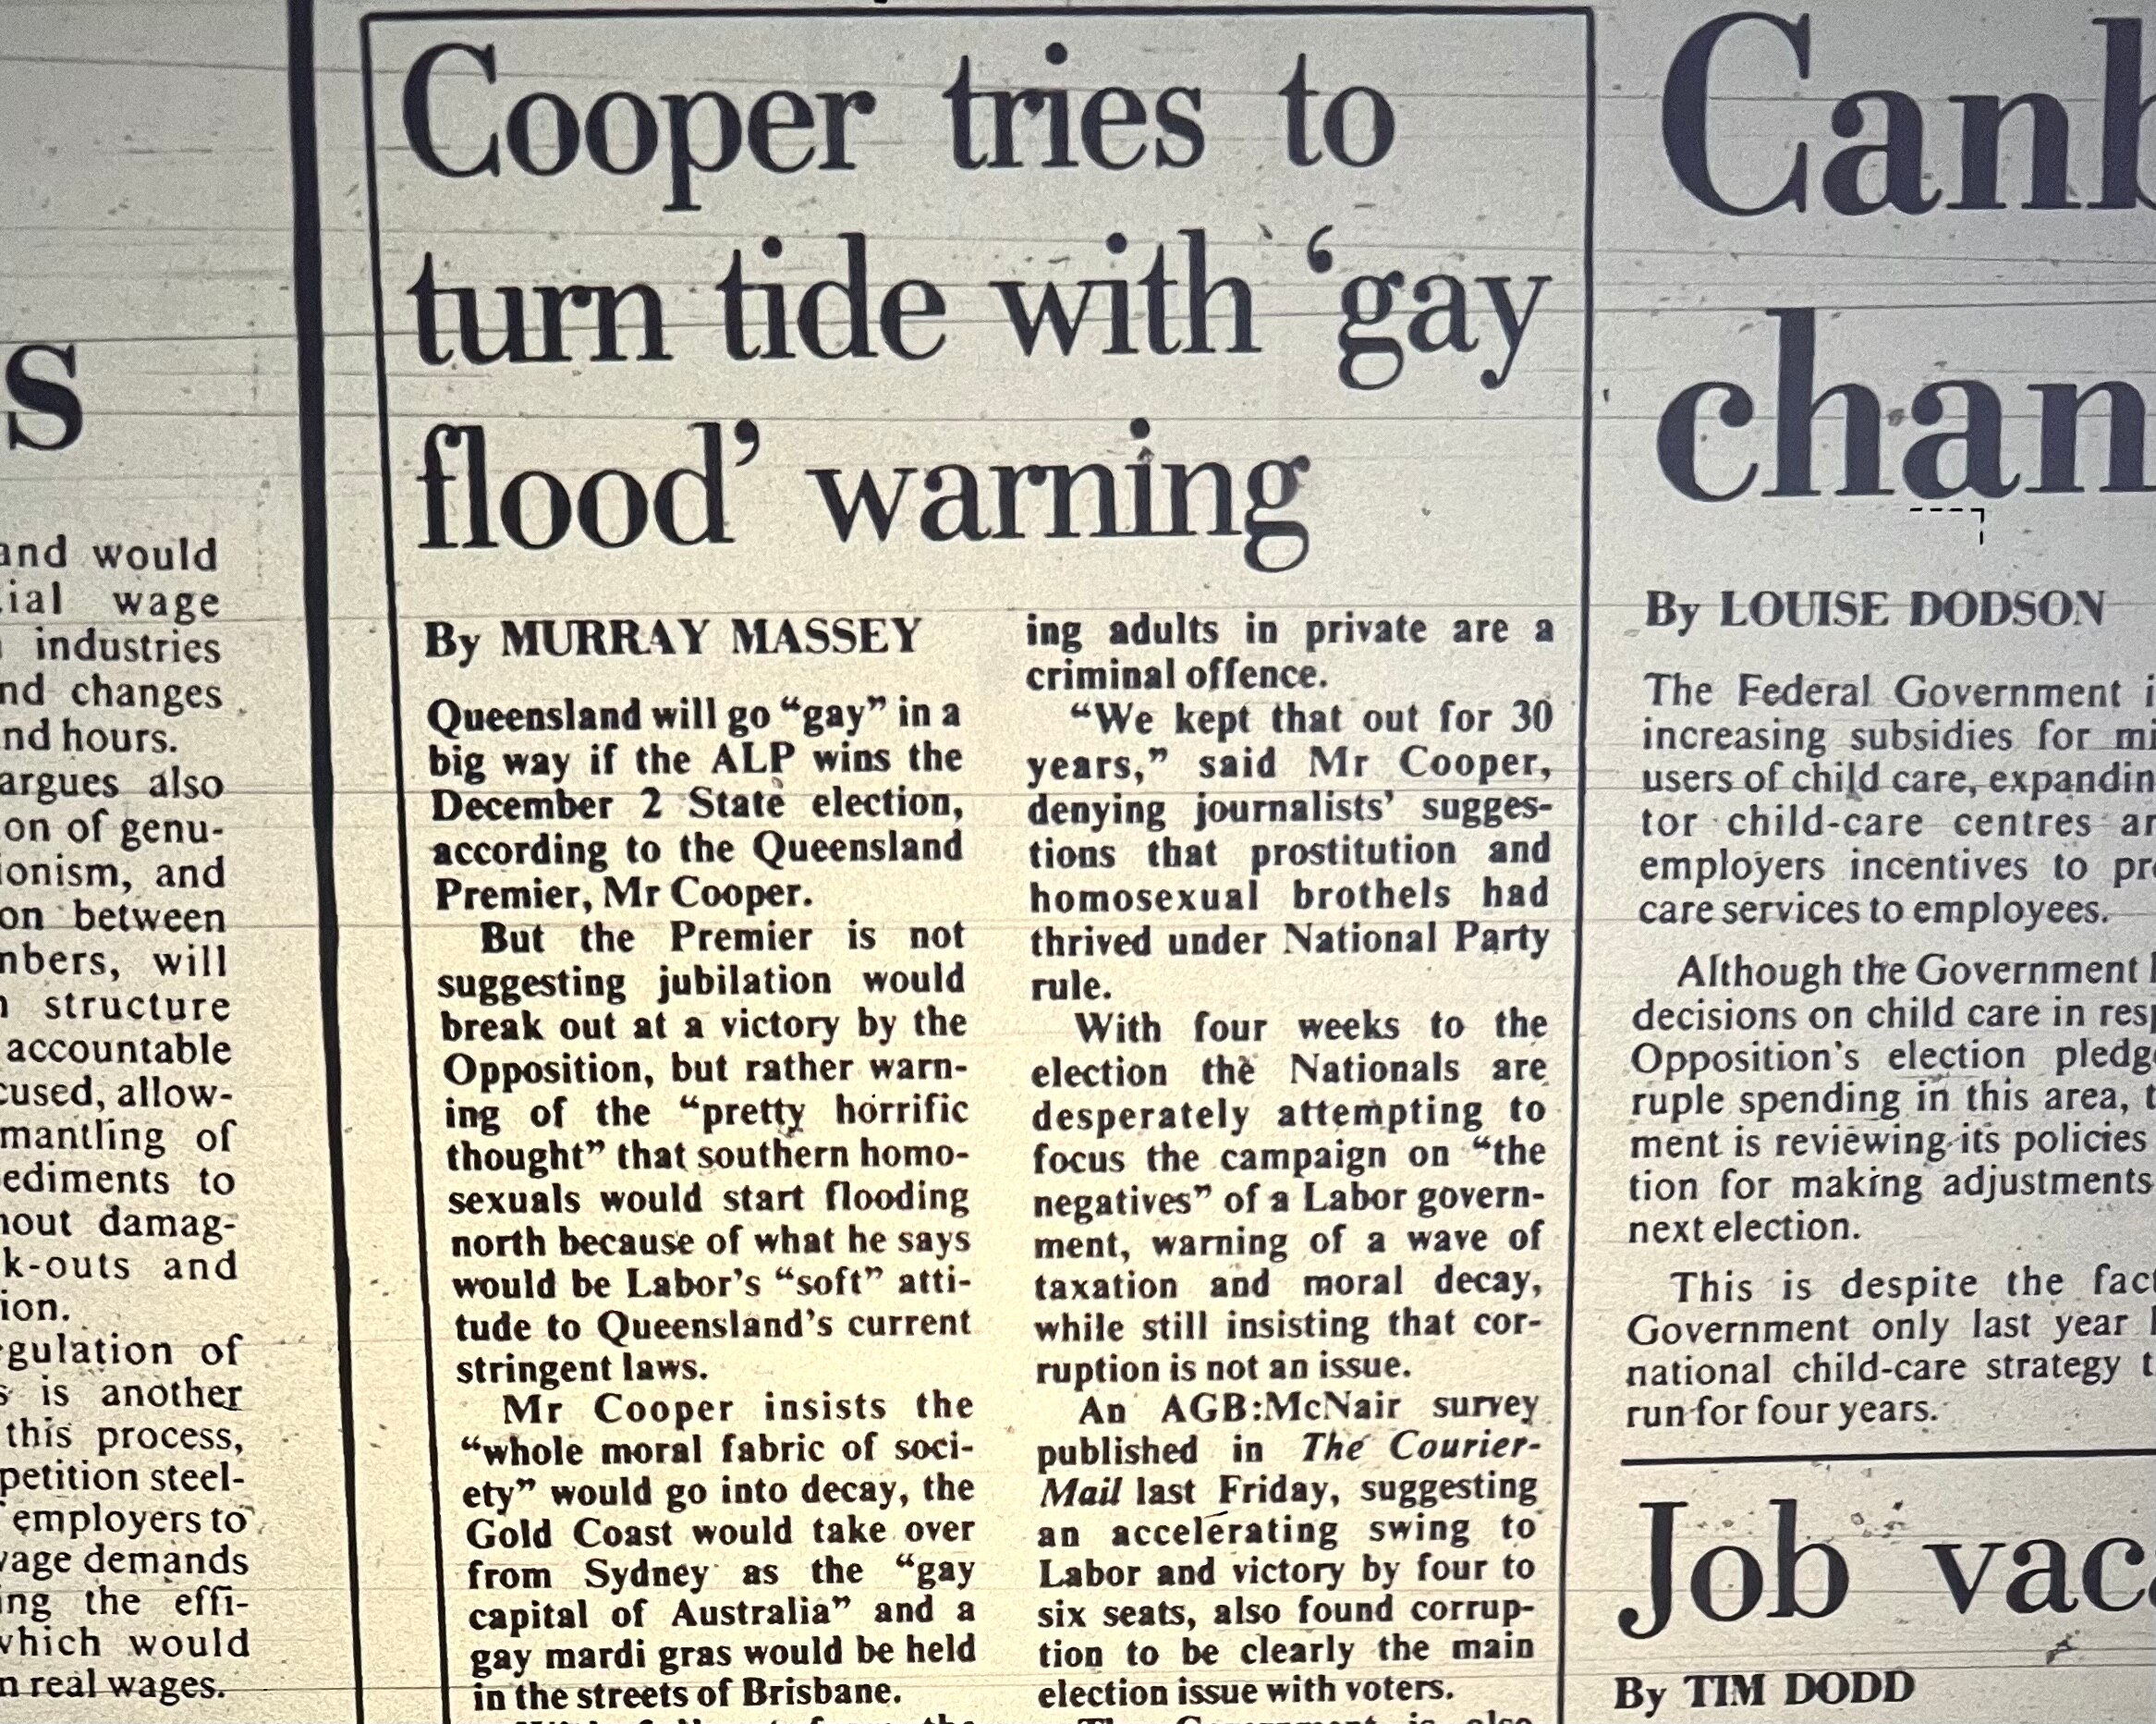 Newspaper clipping described Qld's "gay flood"